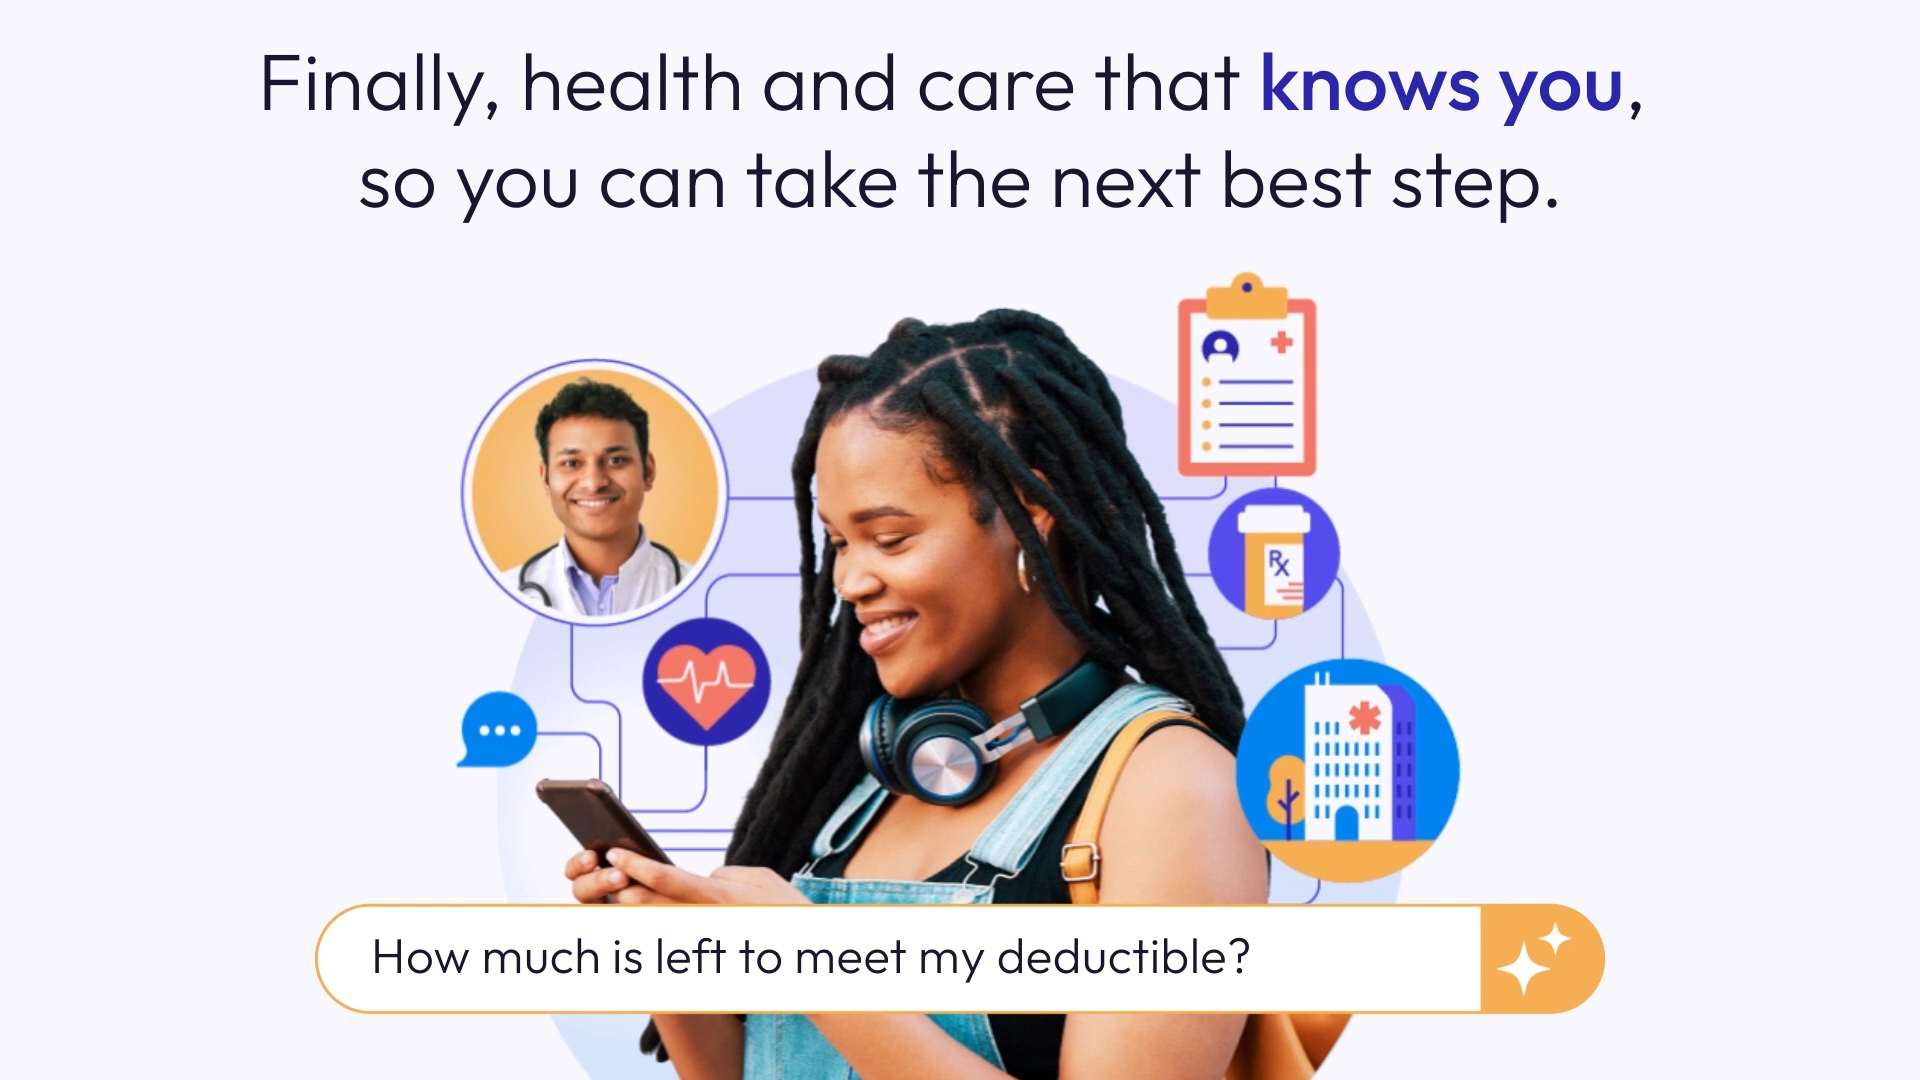 Transcarent Introduces WayFinding, an AI-Powered Consumer Health Experience – For the First Time, One Place for Benefits Navigation + Clinical Guidance + Care Delivery with Your Choice of Point Solutions